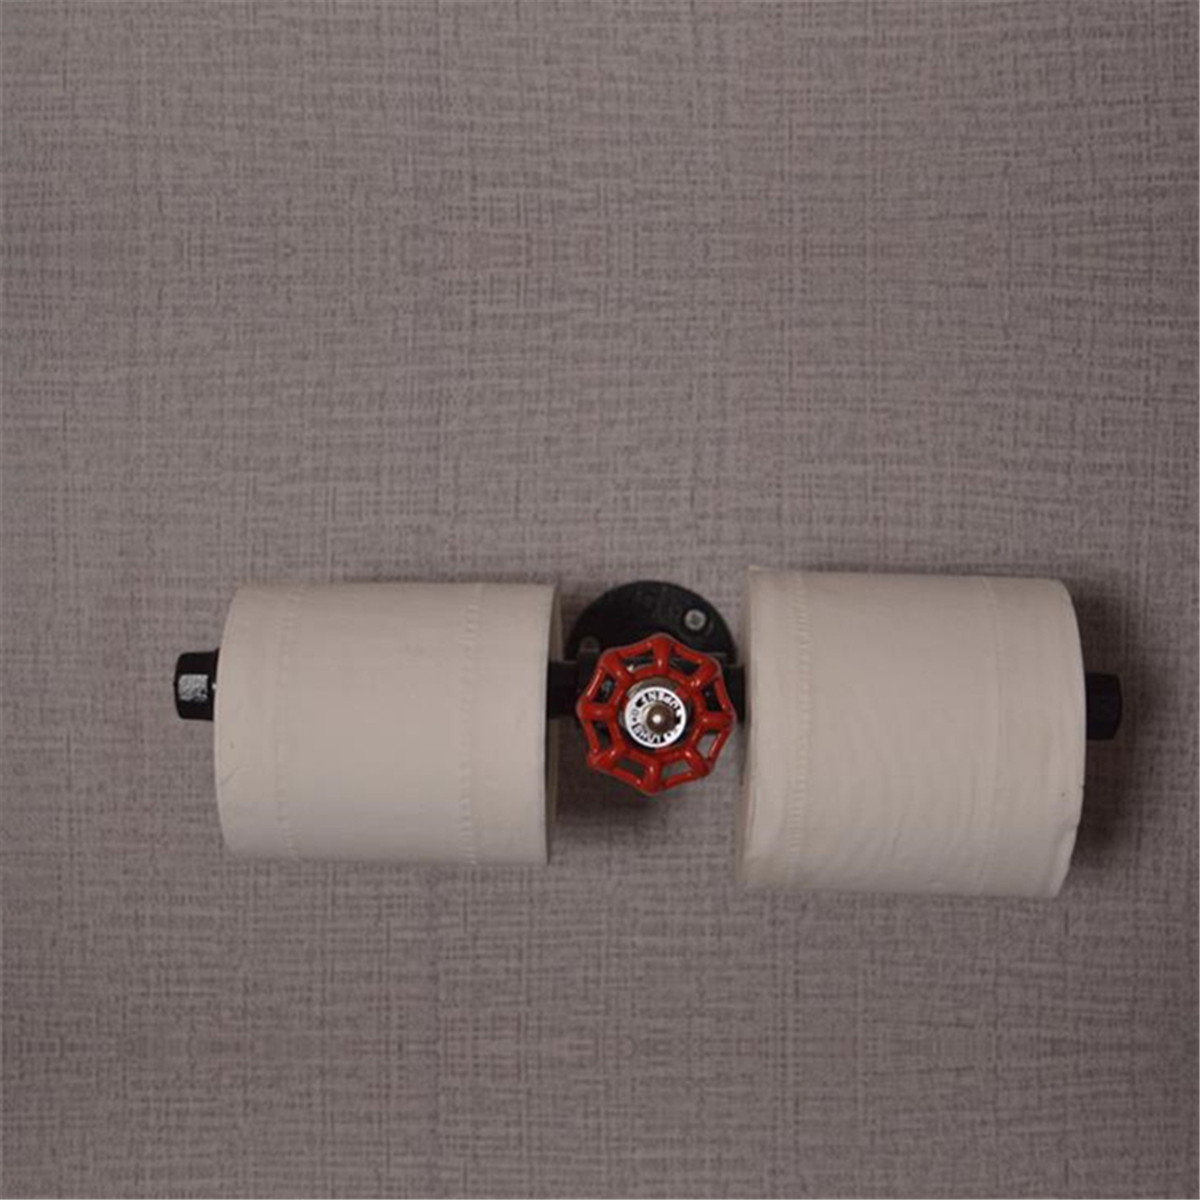 Retro-Industrial-Toilet-Paper-Roll-Holder-Pipe-Shelf-Floating-Holder-Bathroom-Wall-Mounted-1390098-5